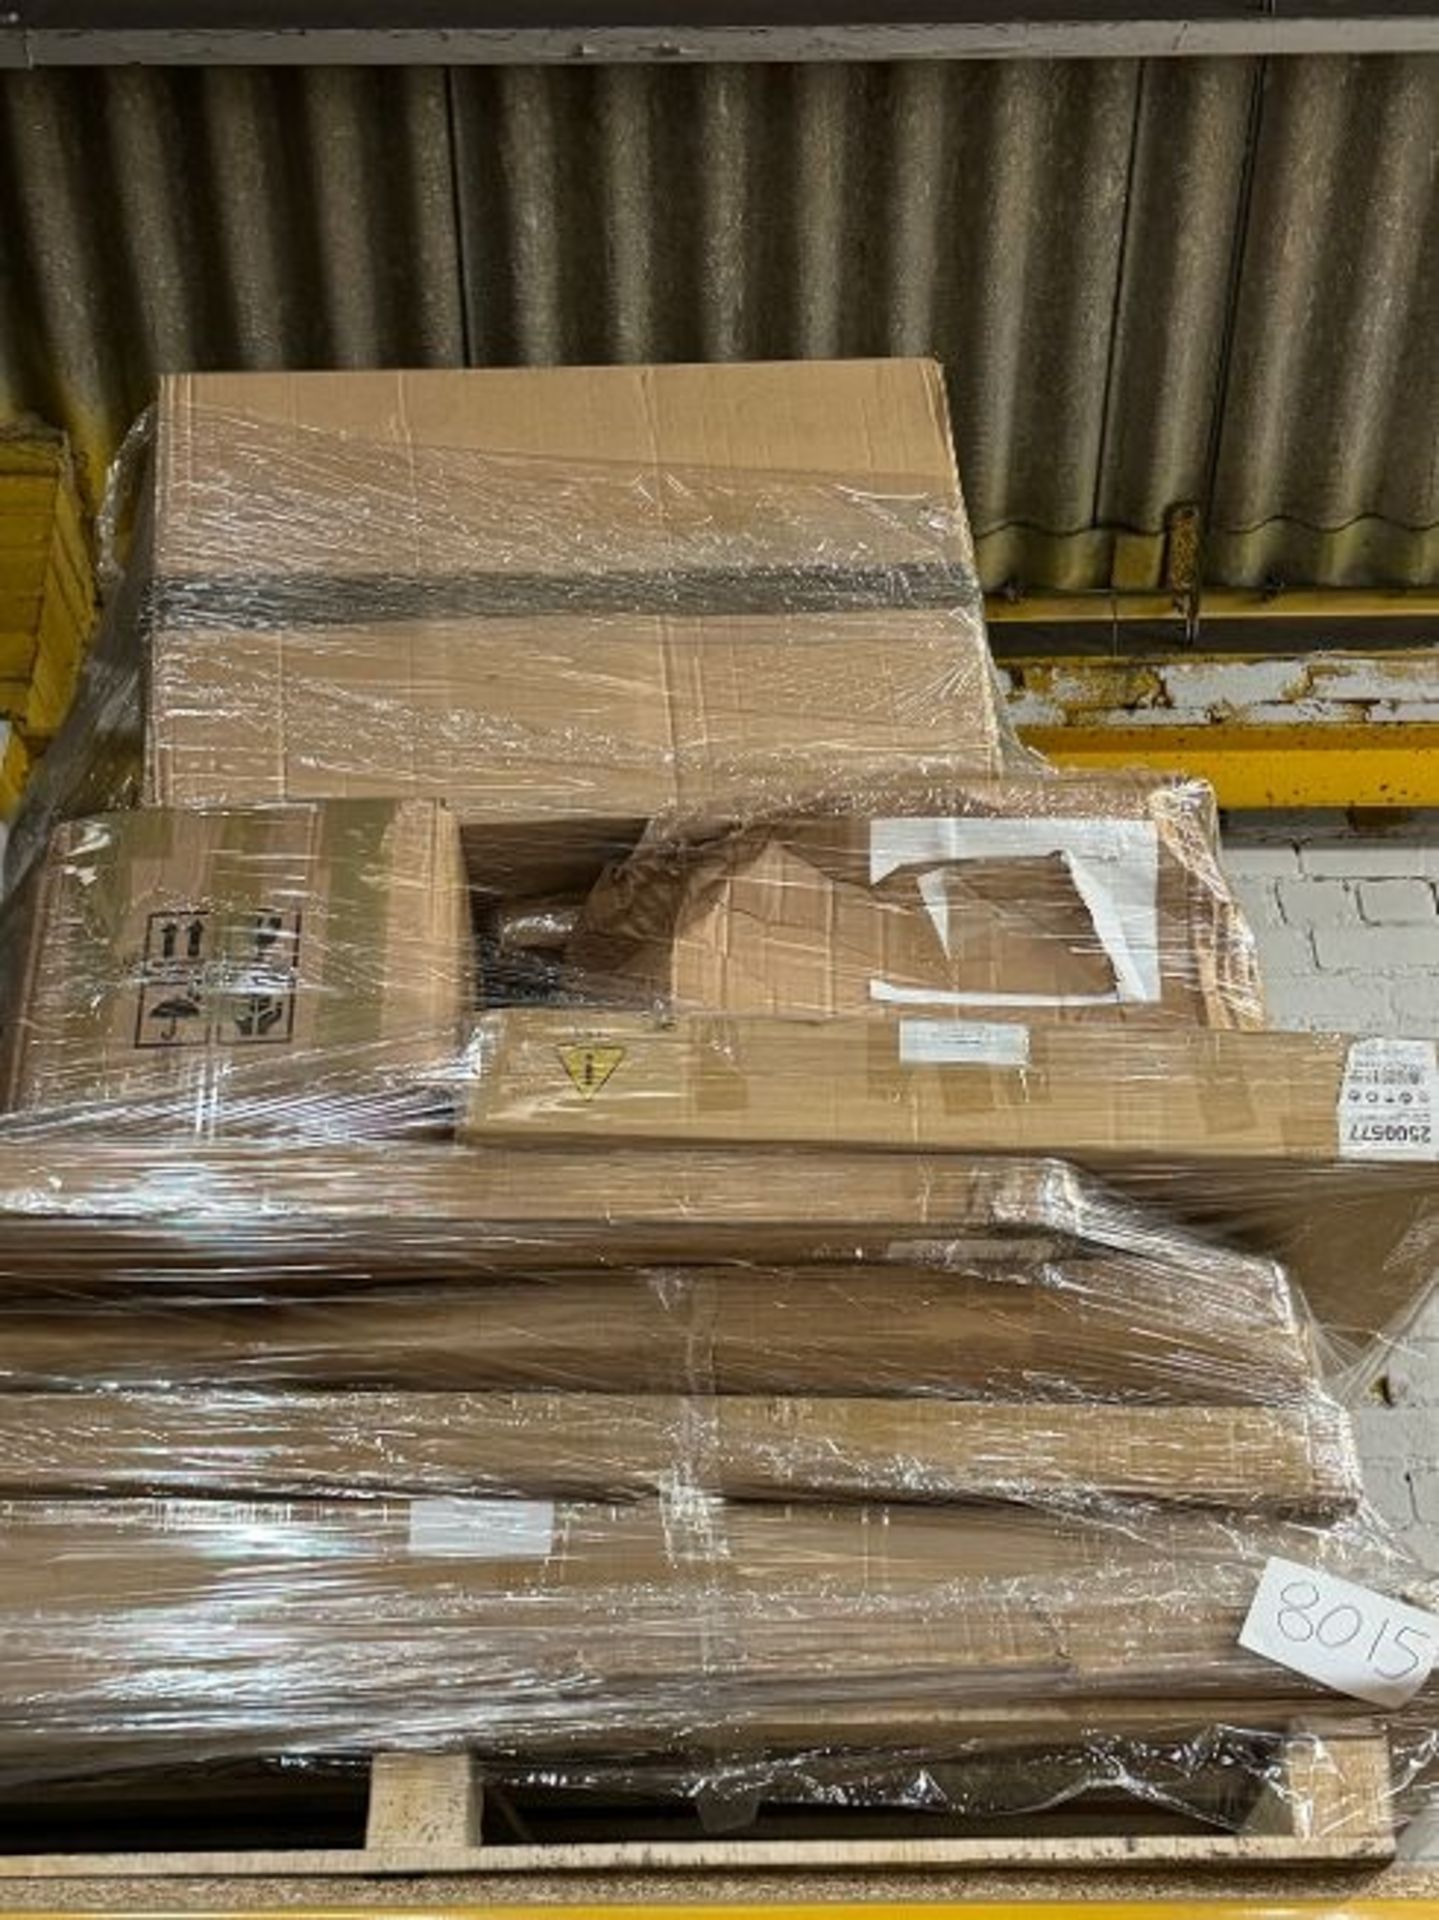 Mixed XL pallet of customer returns (ER) Pallet may Contain: Mixed indoor / Outdoor Furniture and